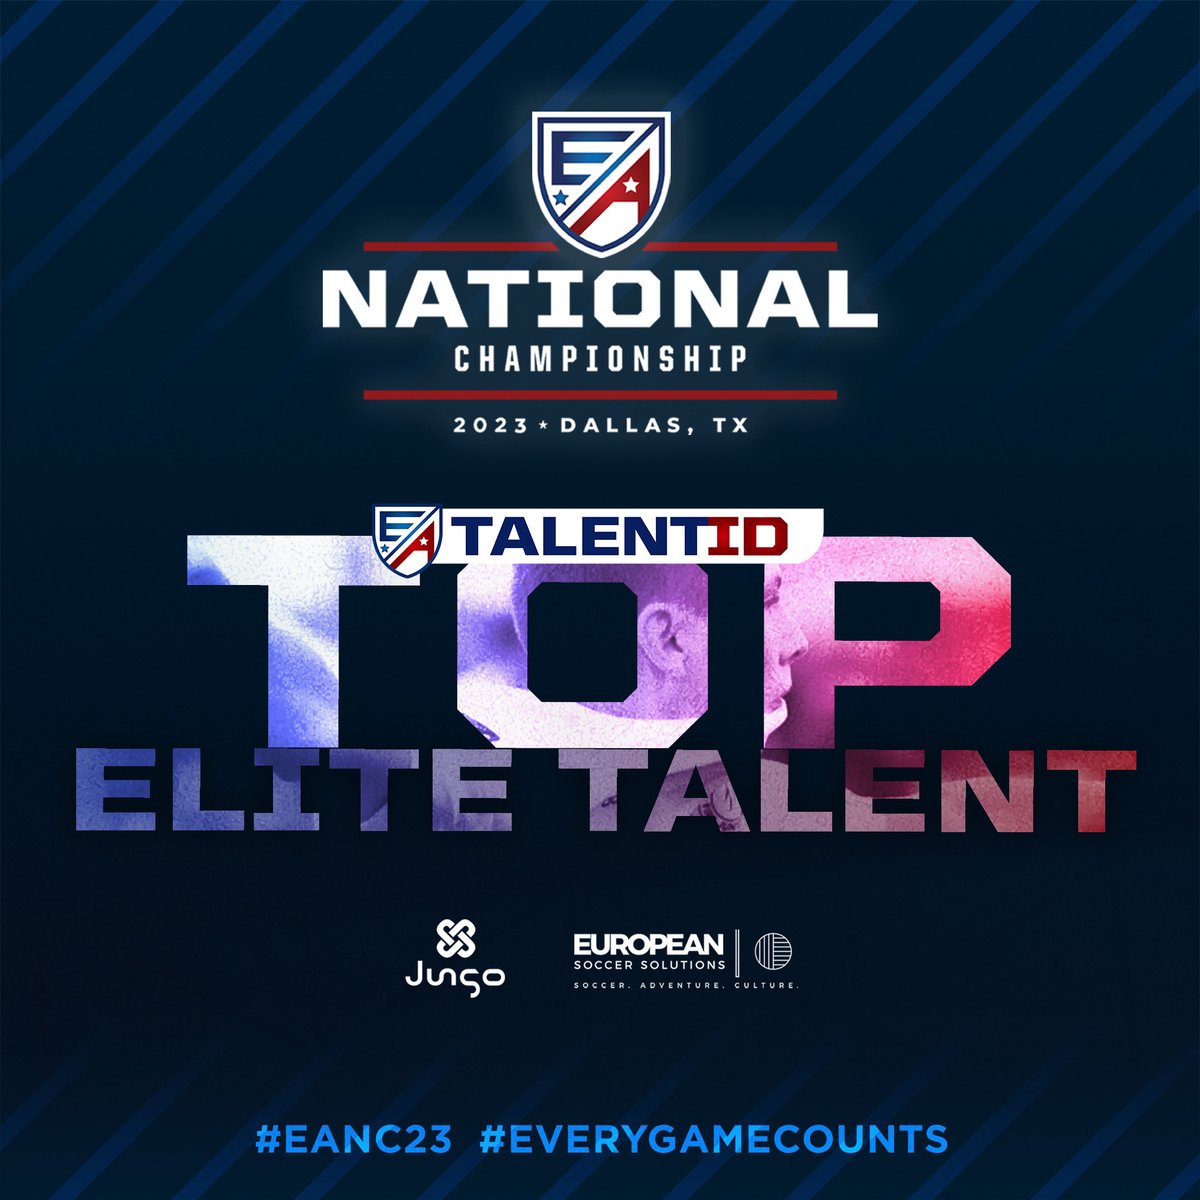 EA Talent ID is excited to see the top 16 teams in each age group and nominate players forward to US Soccer and with the help of head coaches select the Best 11 National Championship! ⚡⚡
#EANC23 #EVERYGAMECOUNTS
#TalentID